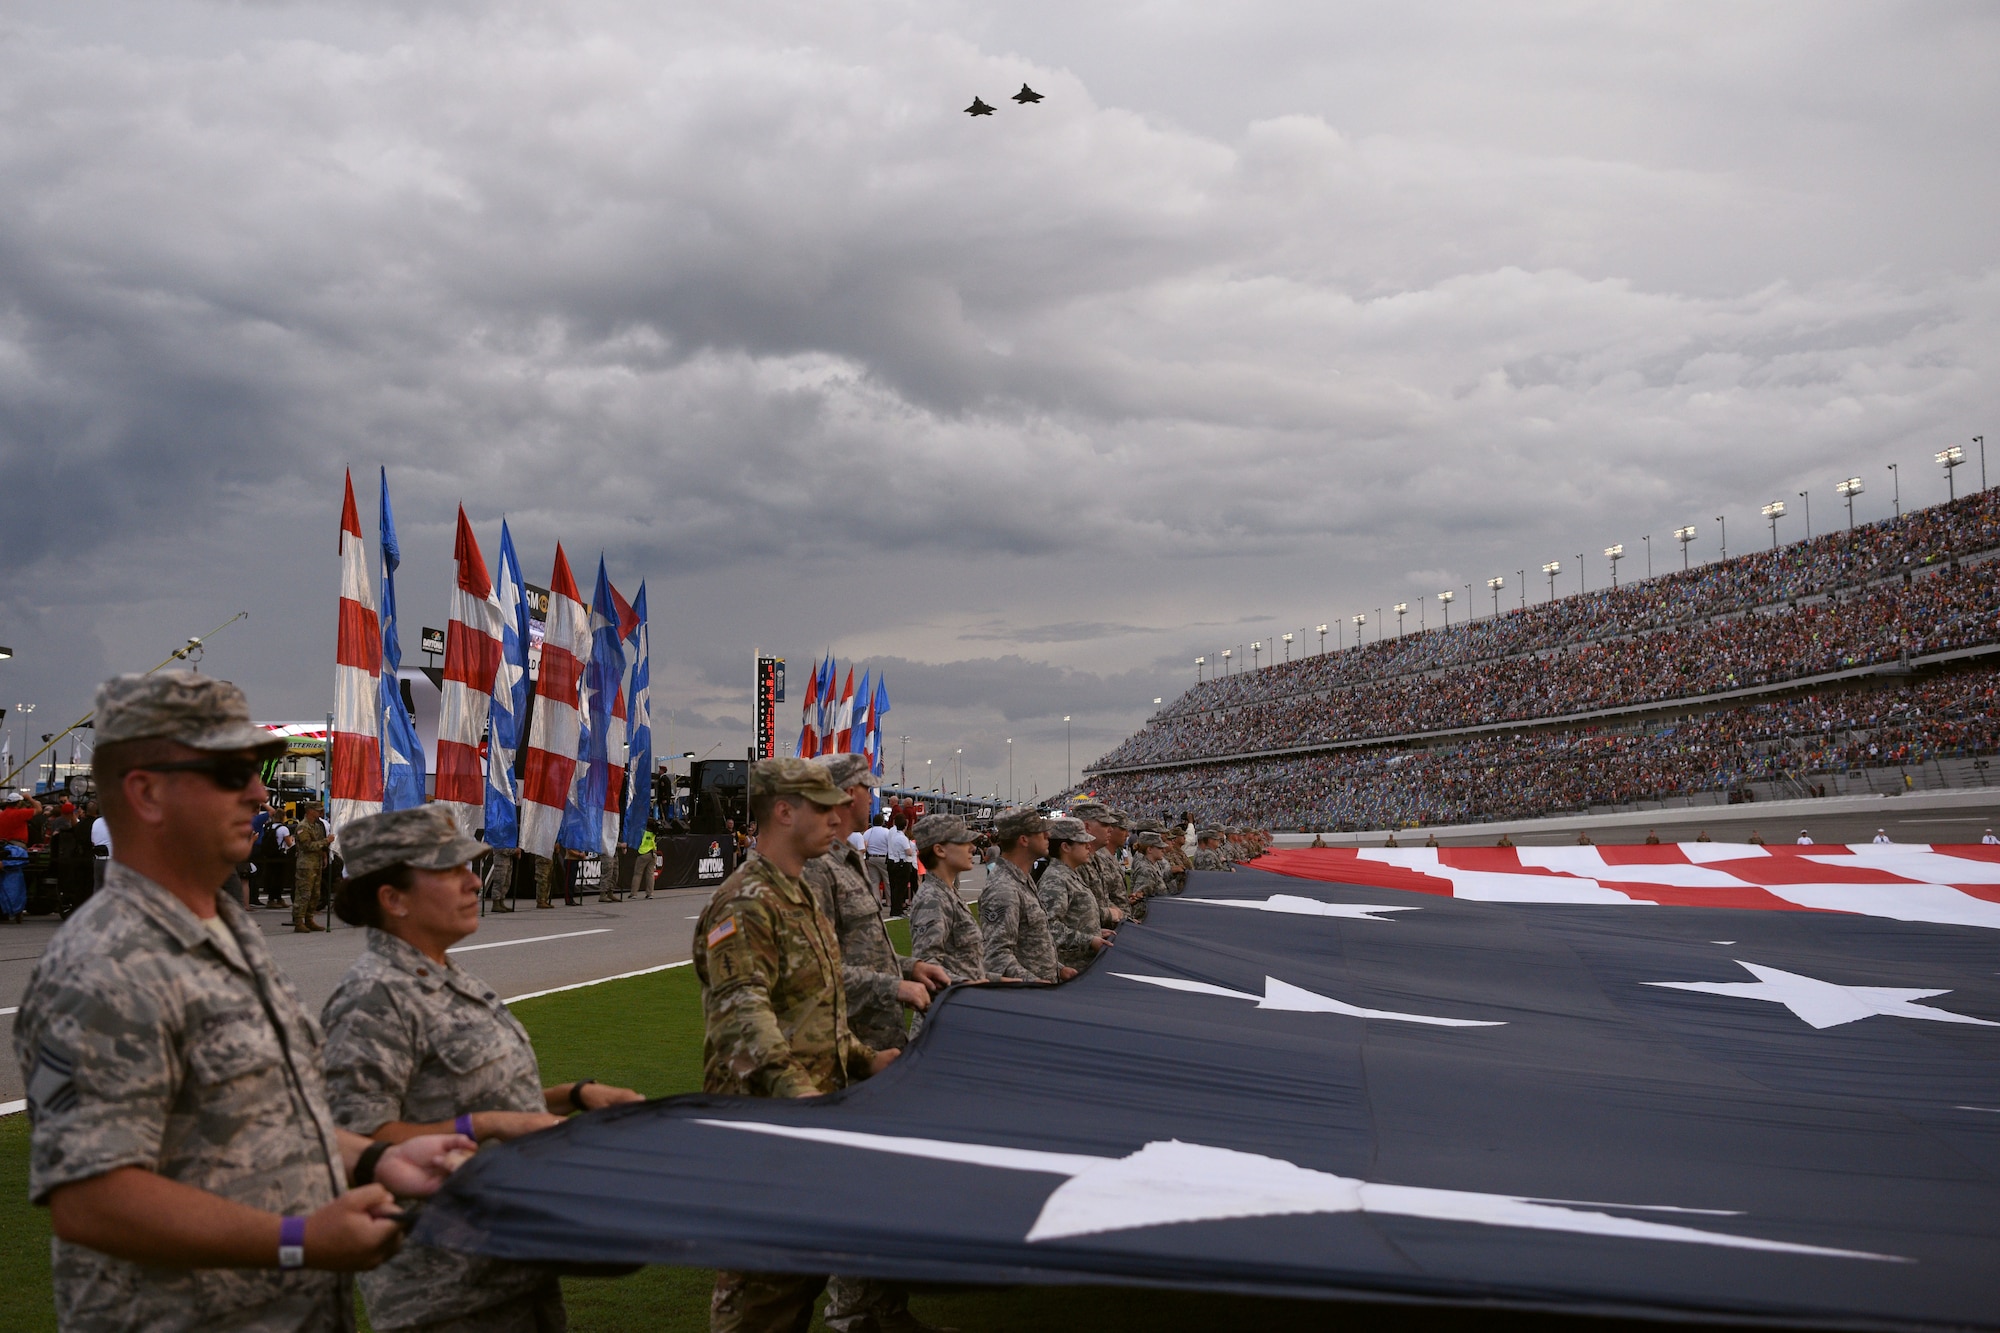 Service members display a 1,000 pound, football field-size American flag during the National Anthem as two F-22 Raptor aircraft conduct a fly over July 7, at the Daytona International Speedway in Daytona Beach, Fla. The F-22's were part of the 43rd Fighter Squadron at Tyndall Air Force Base, Fla. (U.S. Air Force photo by Airman 1st Class Zoe Thacker)